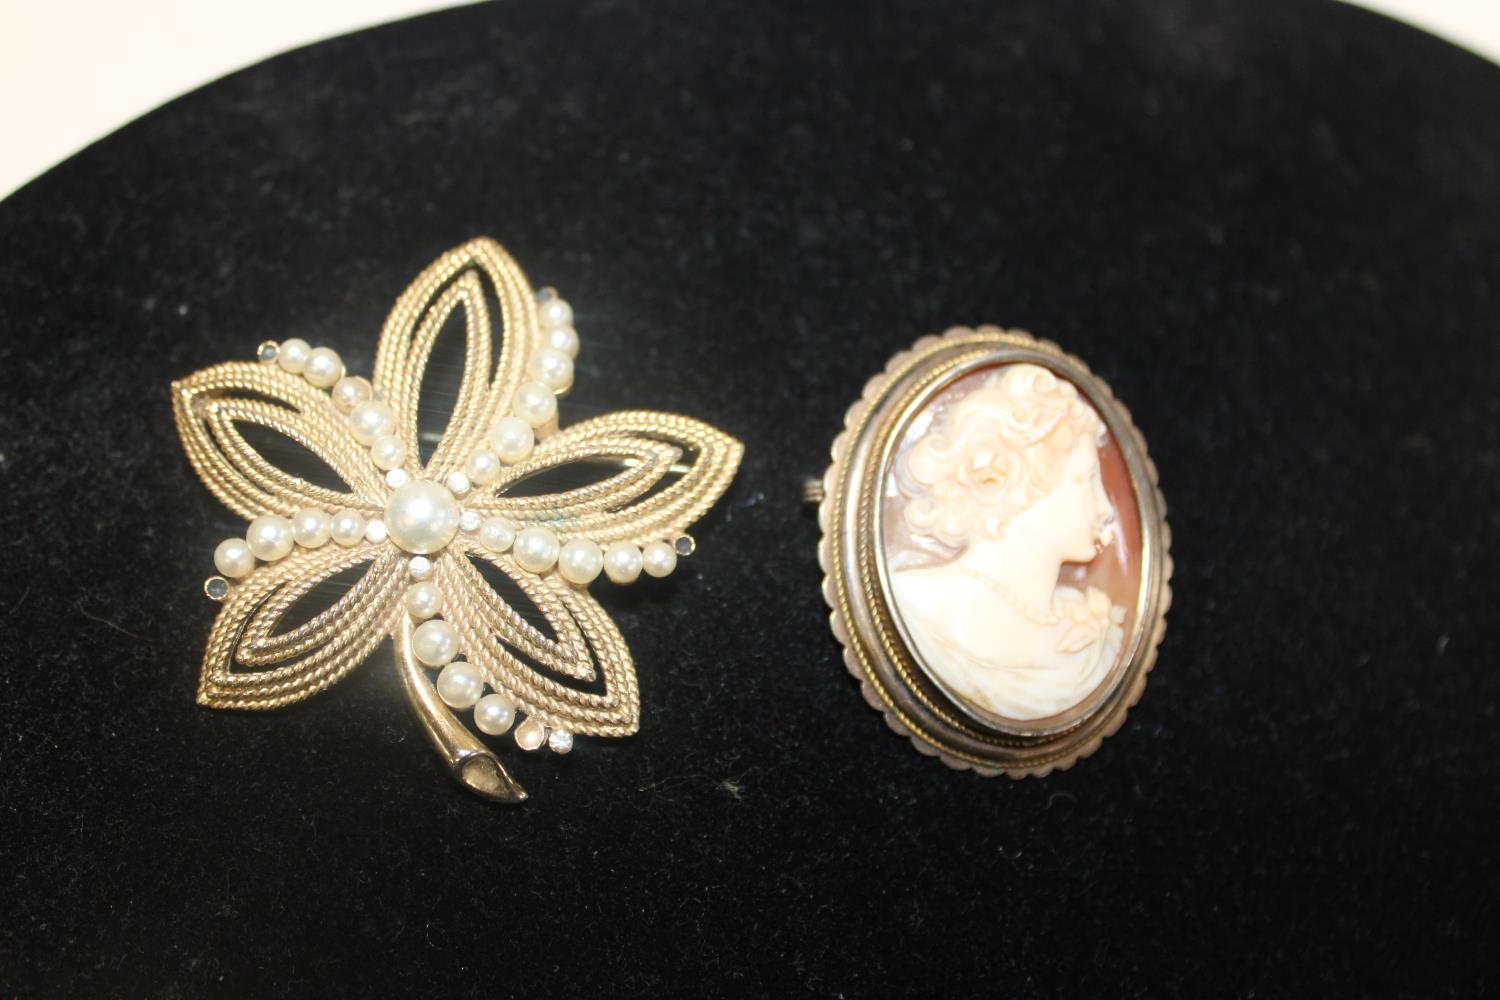 Two vintage costume brooches